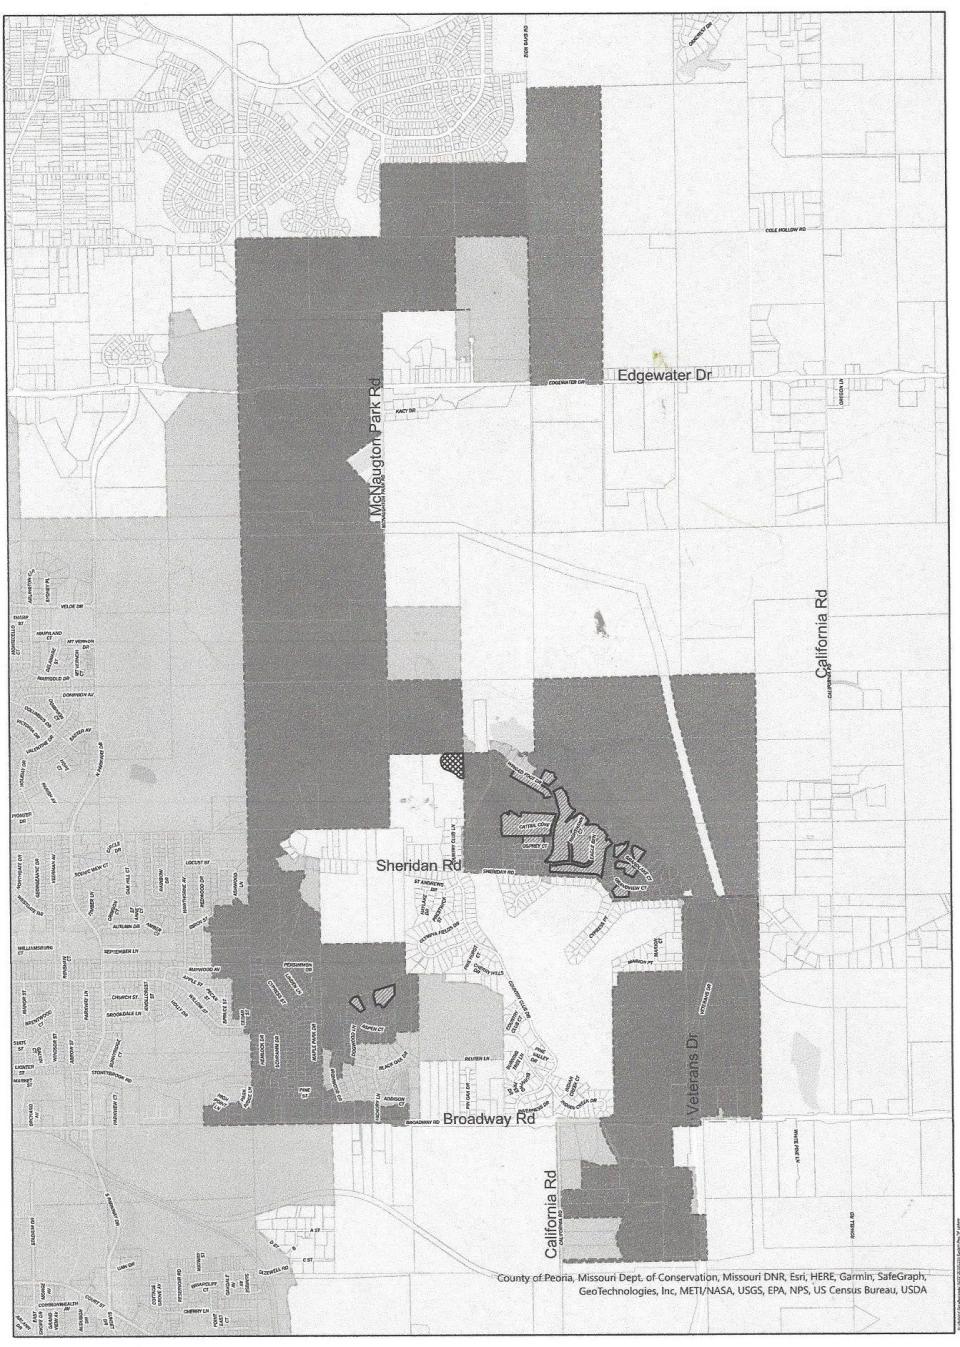 A boundary map of Pekin's newly created East Residential TIF district.